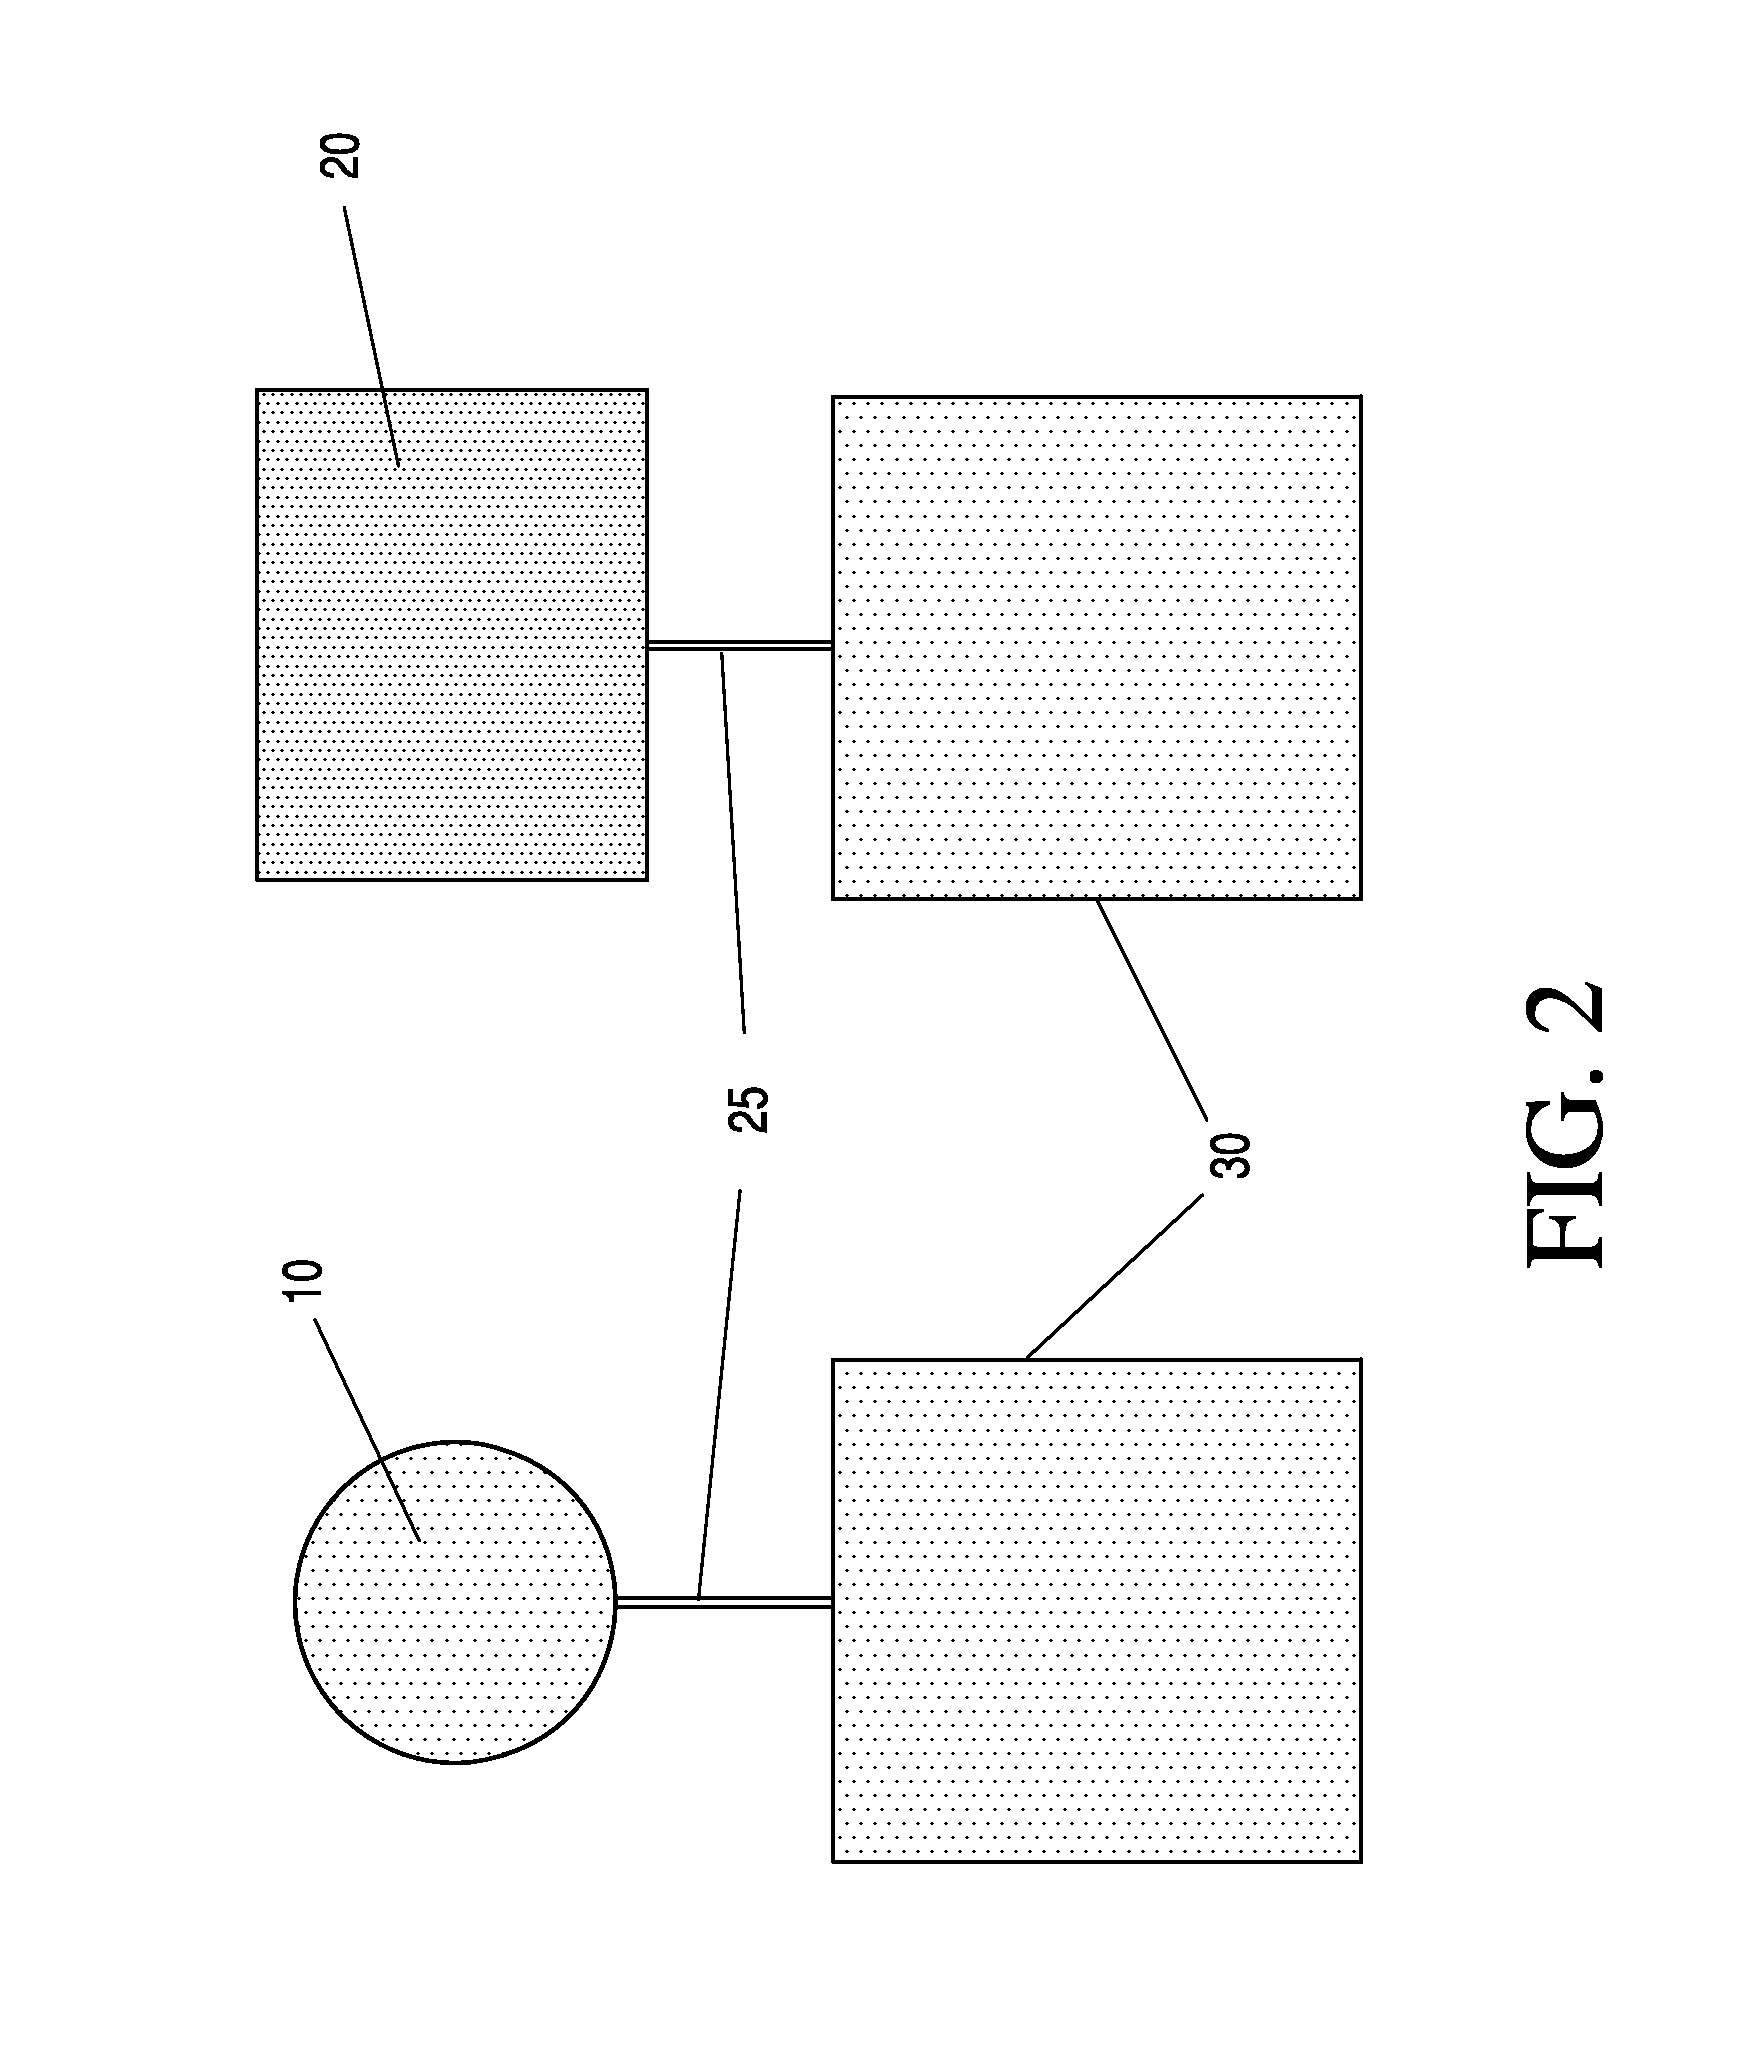 Biosensor structures for improved point of care testing and methods of manufacture thereof